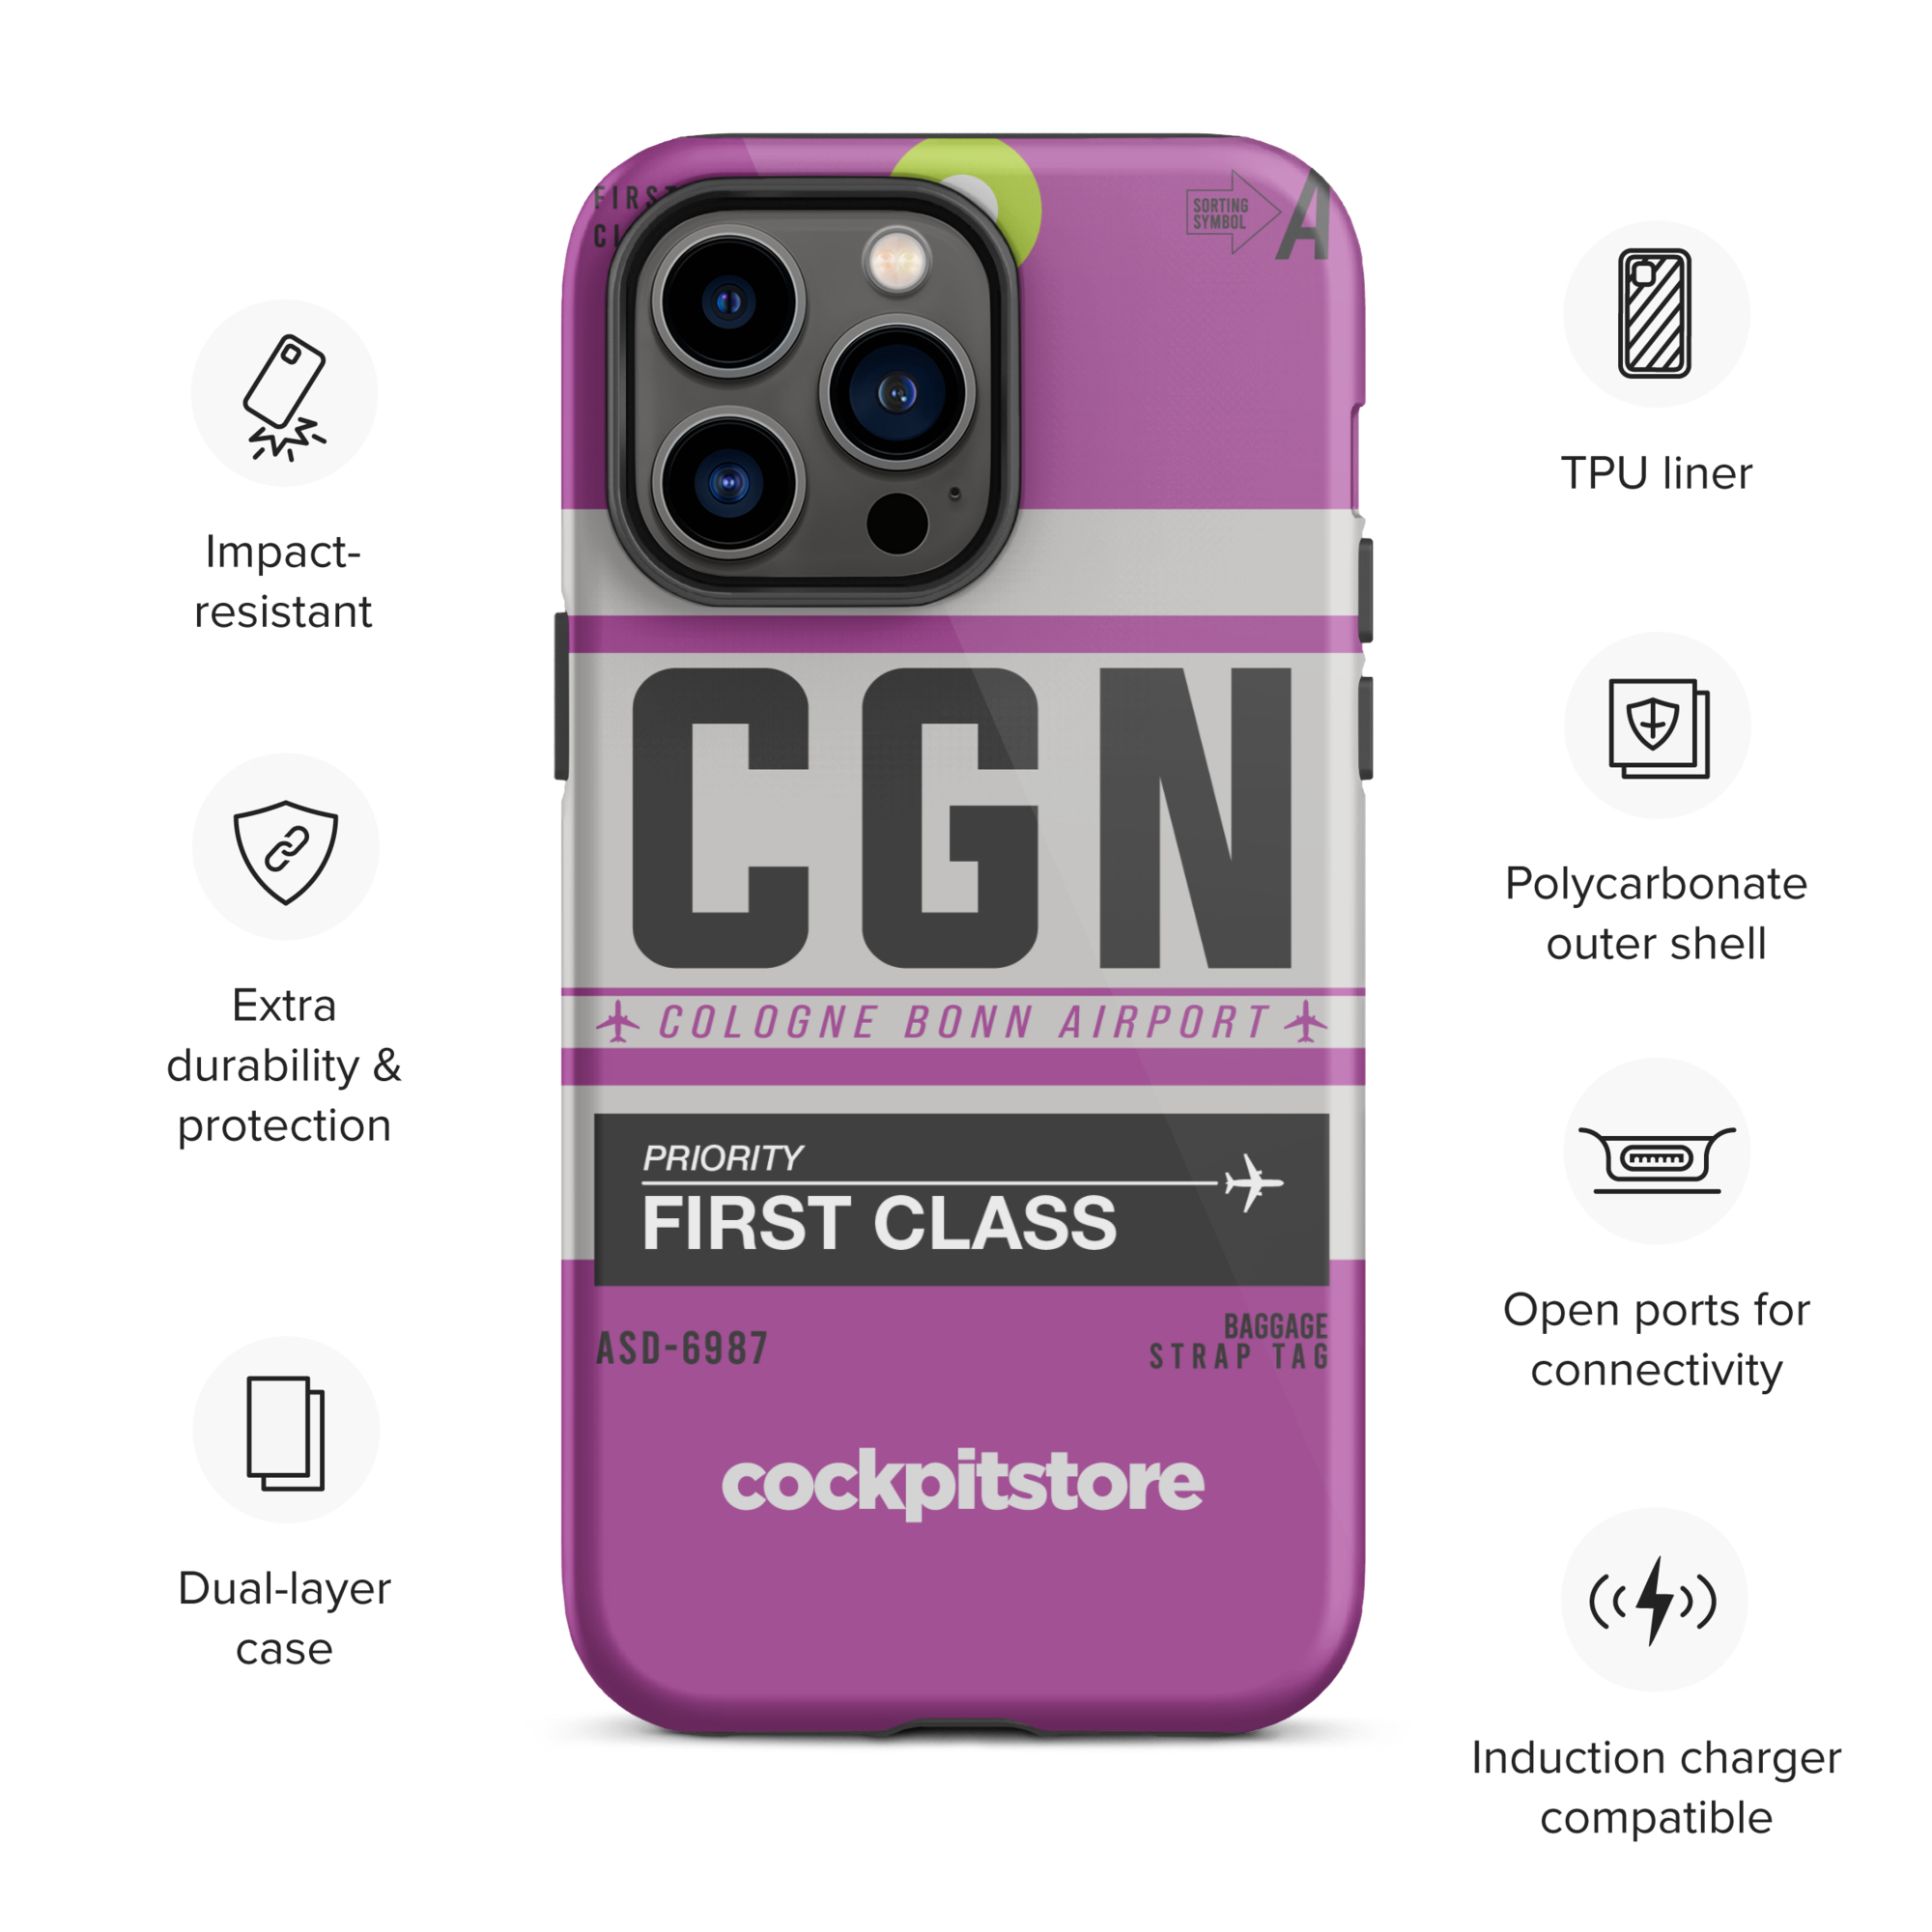 CGN - Cologne iPhone Tough Case mit Flughafencode